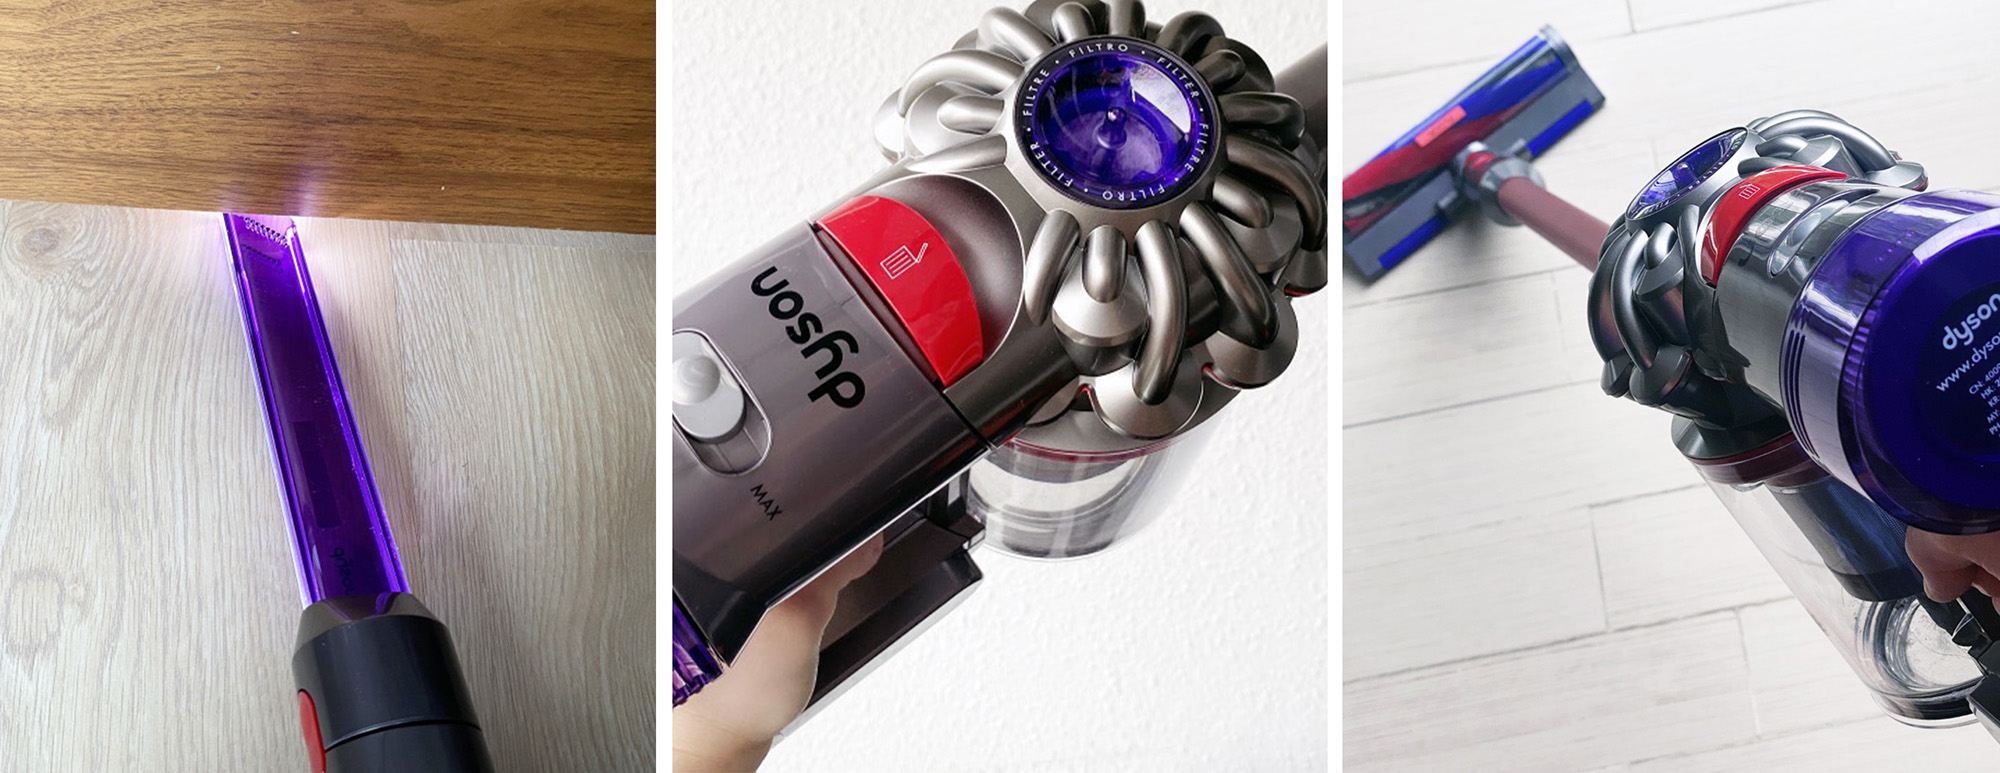 Unboxing and Review of the Dyson V8 Slim™ Fluffy + - NYLON SINGAPORE